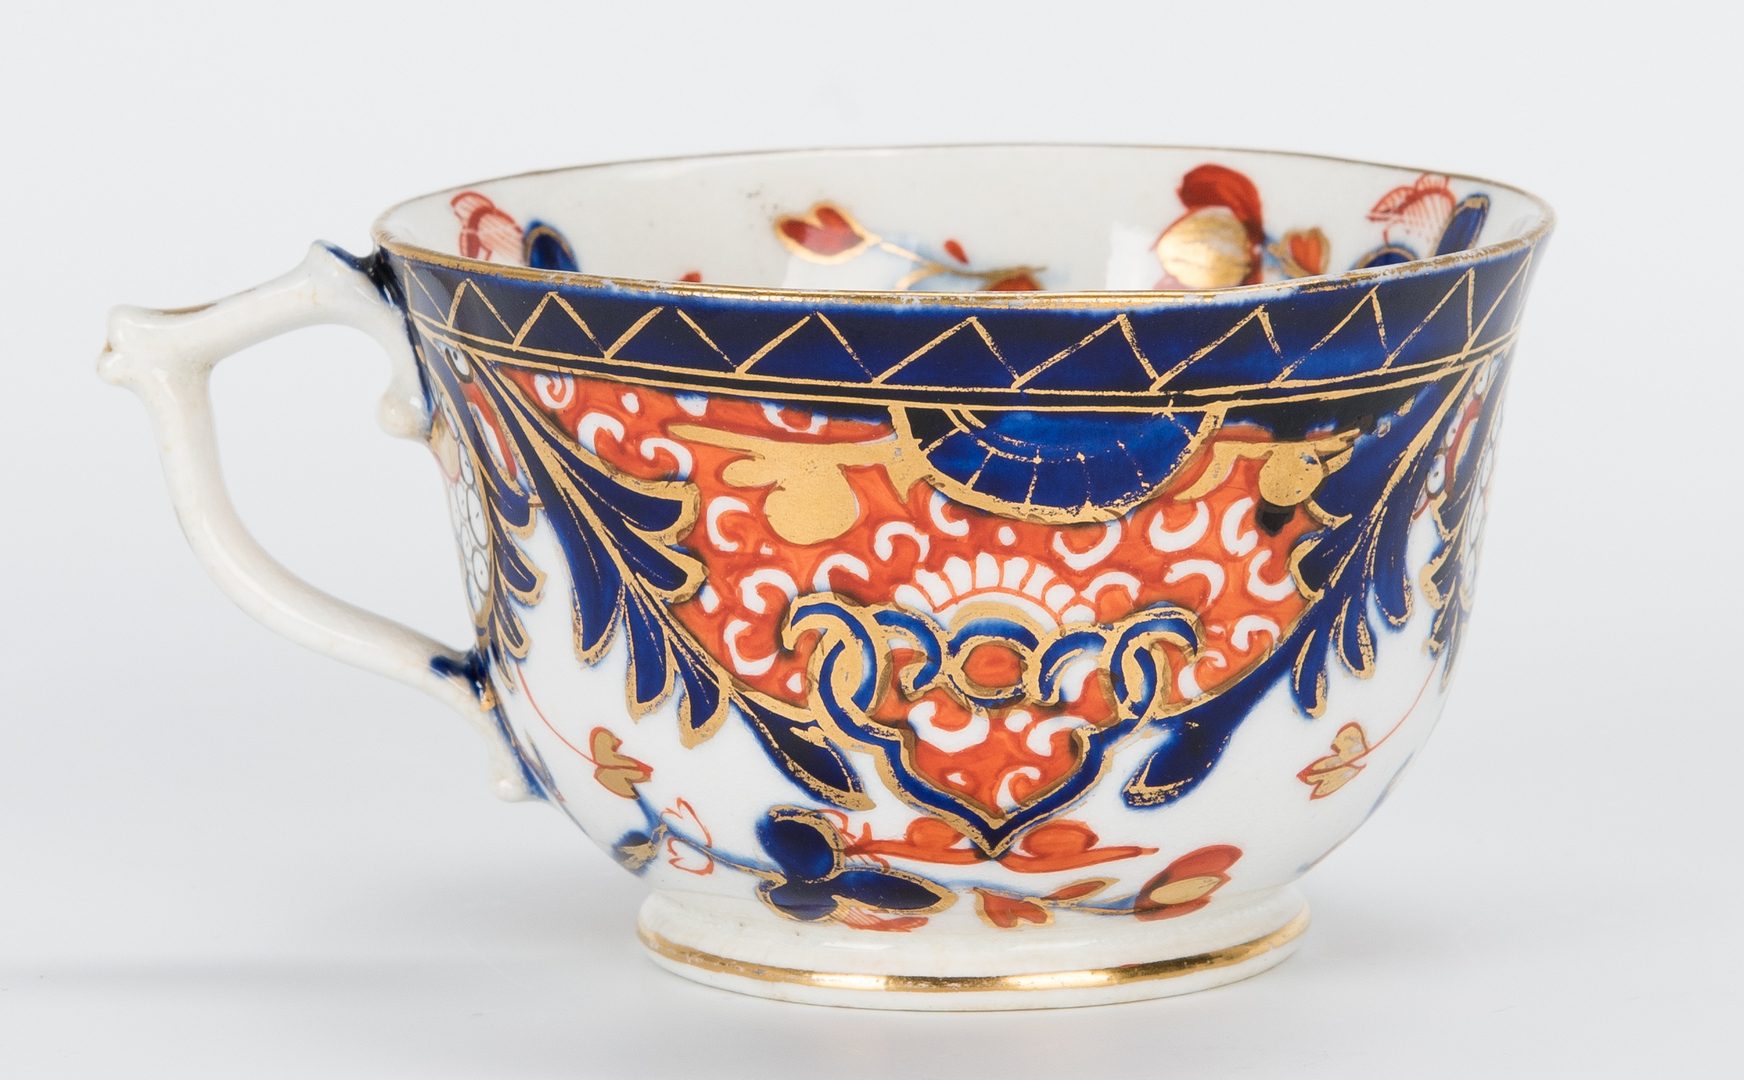 Lot 264: Large Group Royal Crown Derby Imari, most 19th Century